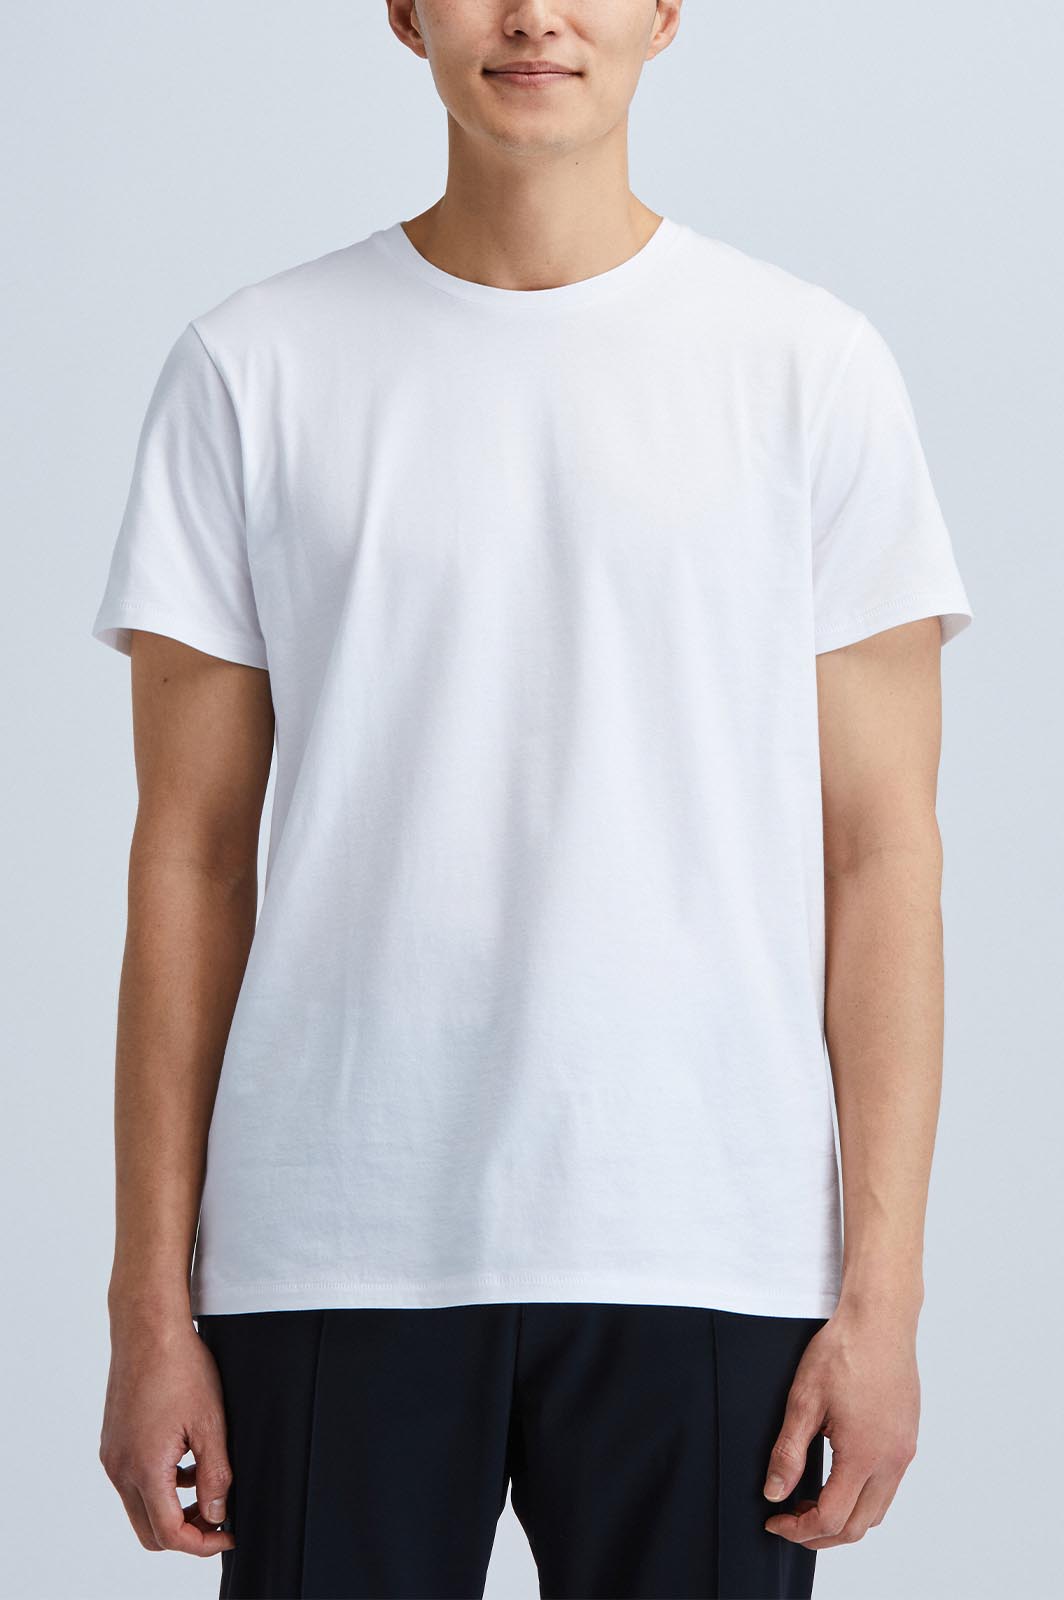 Sustainable Men's White T-shirt - of Apparel